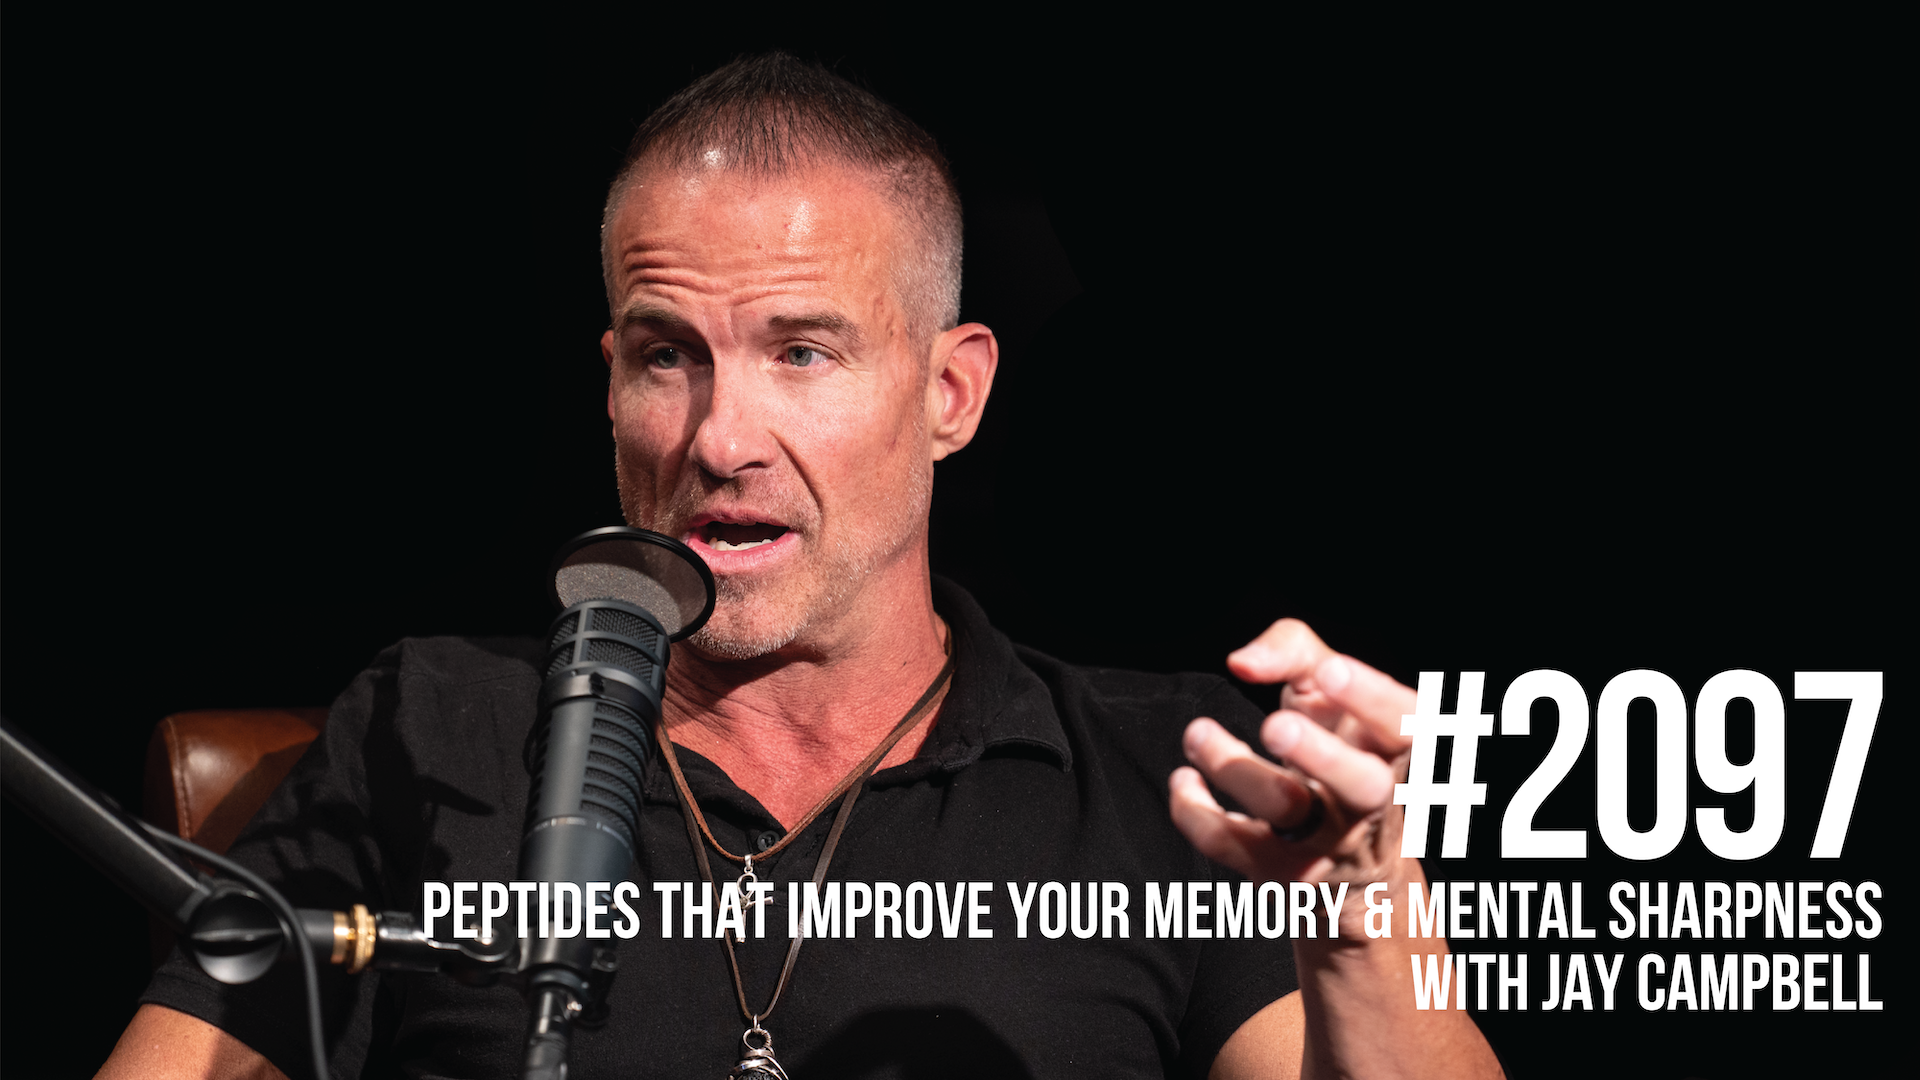 2097: Peptides That Improve Your Memory & Mental Sharpness With Jay Campbell